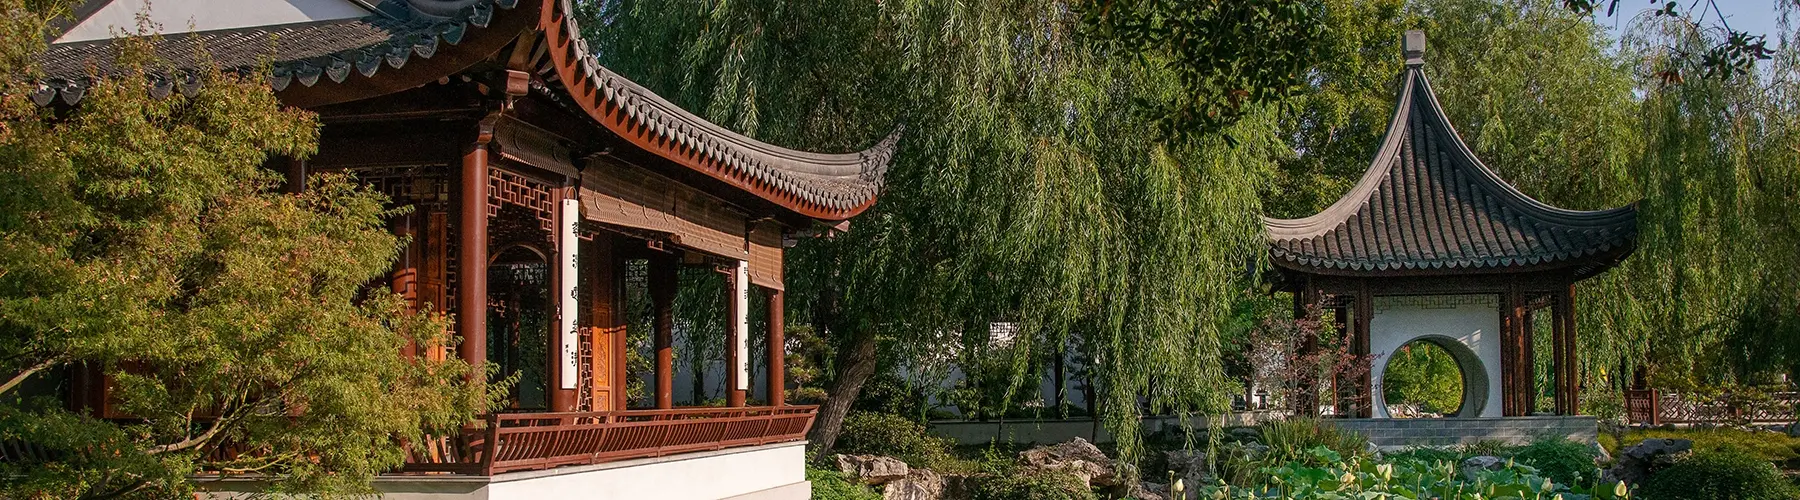 chinese garden with pavilions